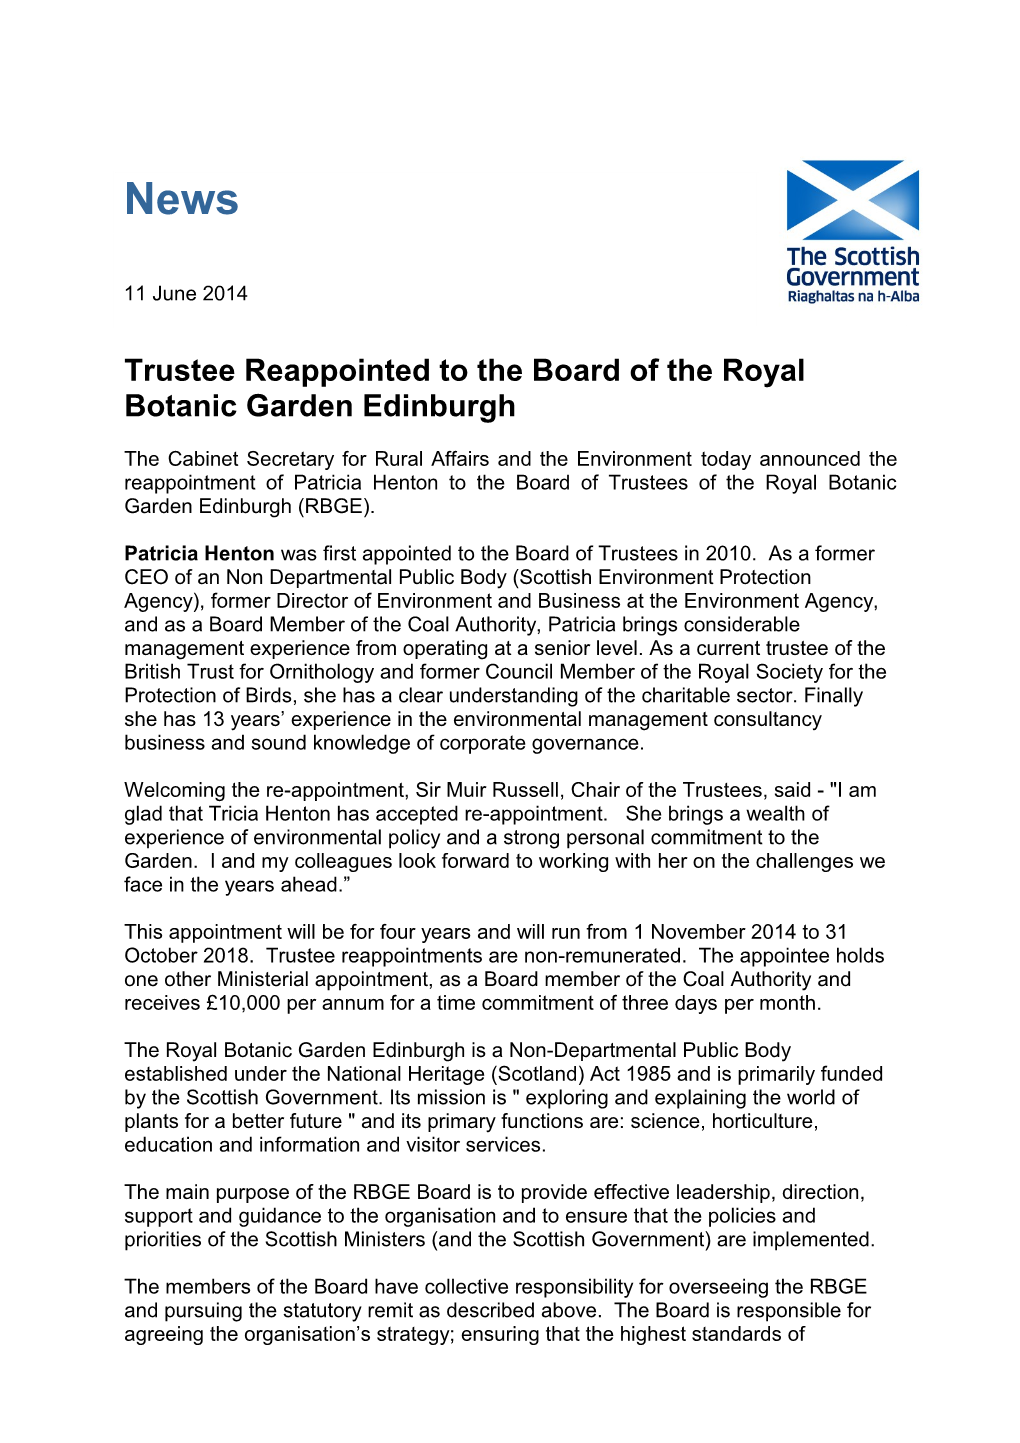 Trustee Reappointed to the Board of the Royal Botanic Garden Edinburgh